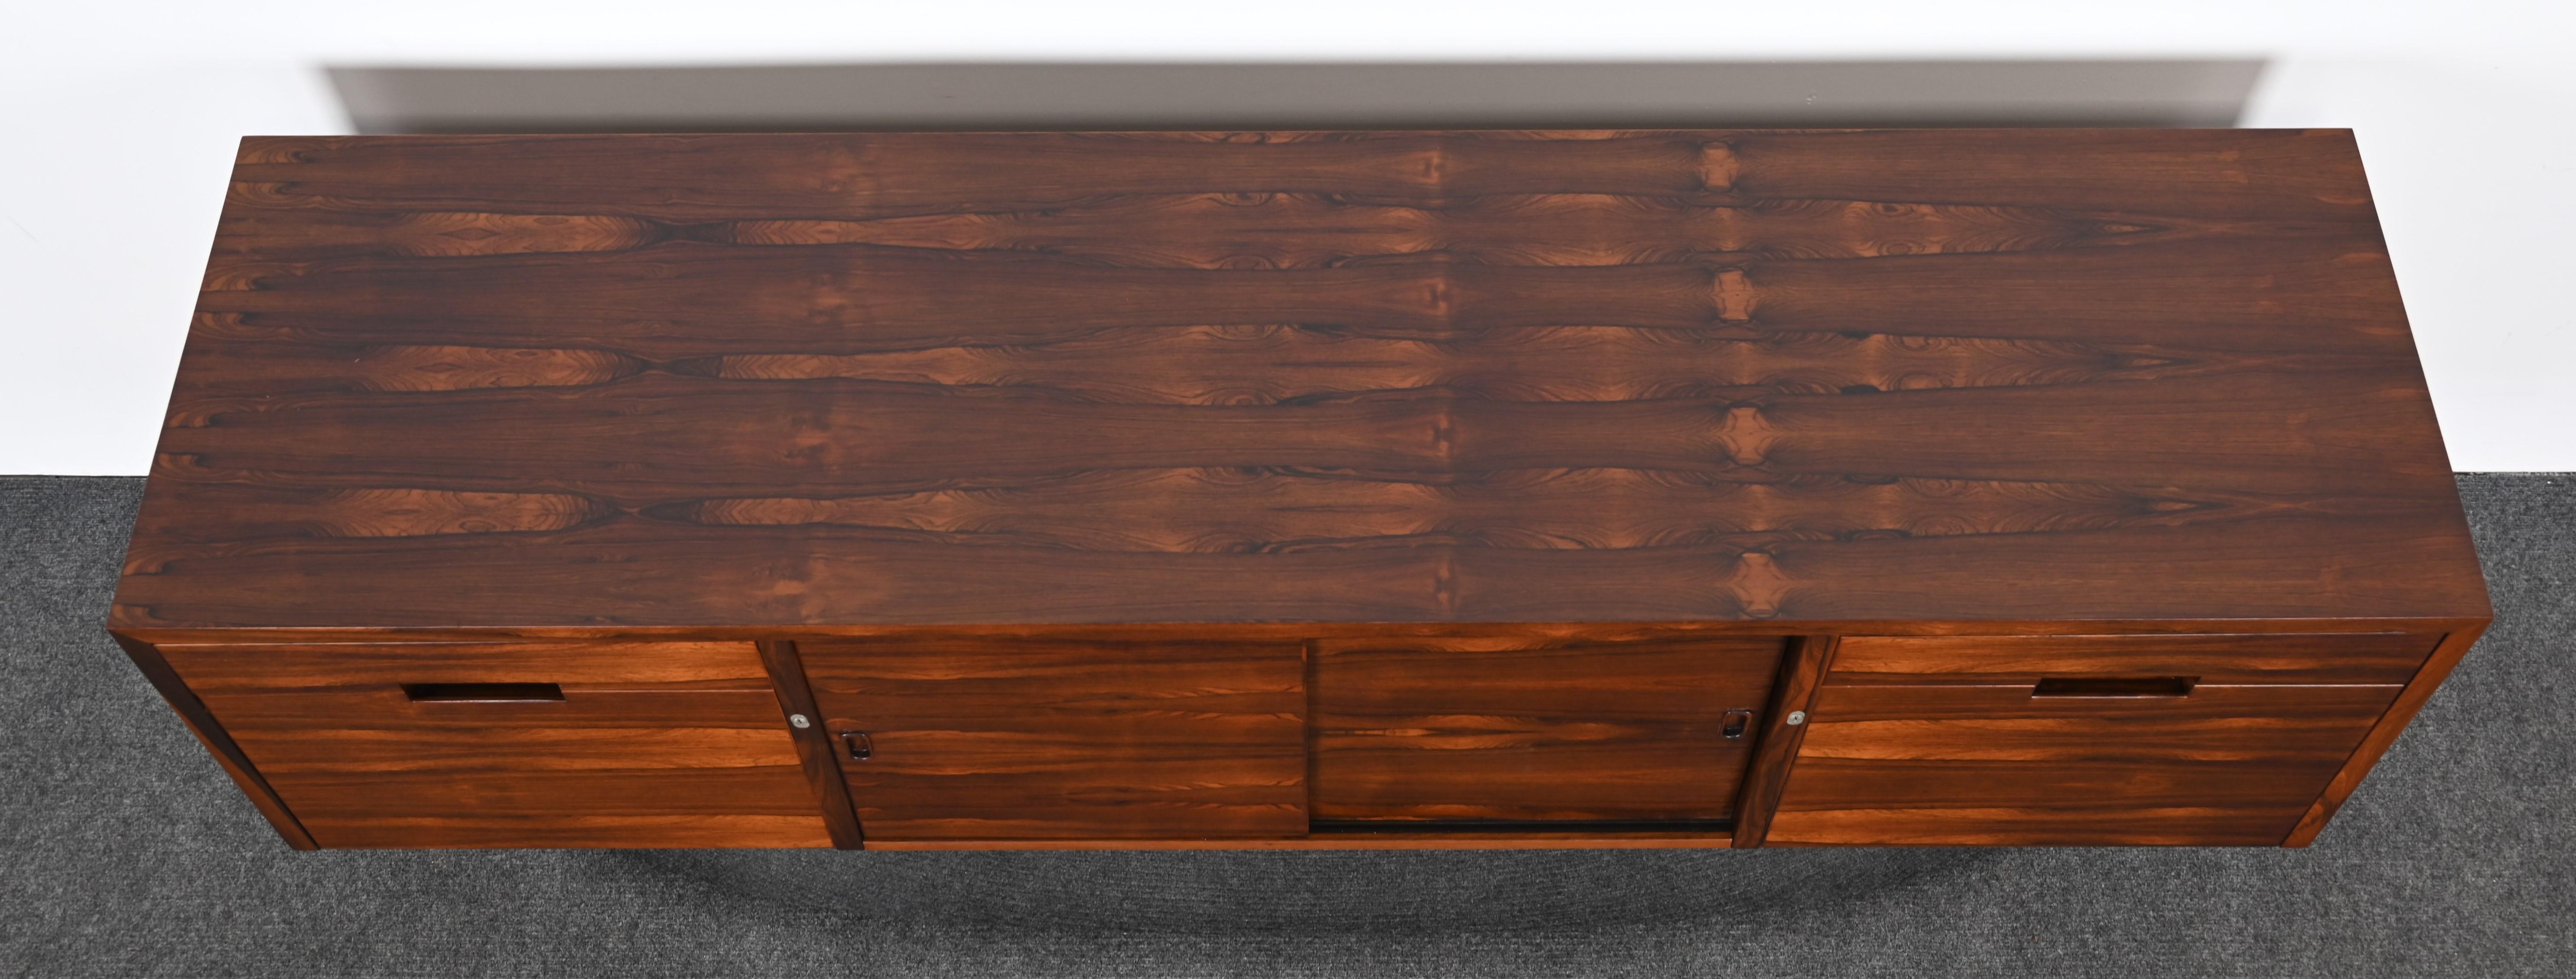 Danish Rosewood and Chrome Credenza, 1960s For Sale 6